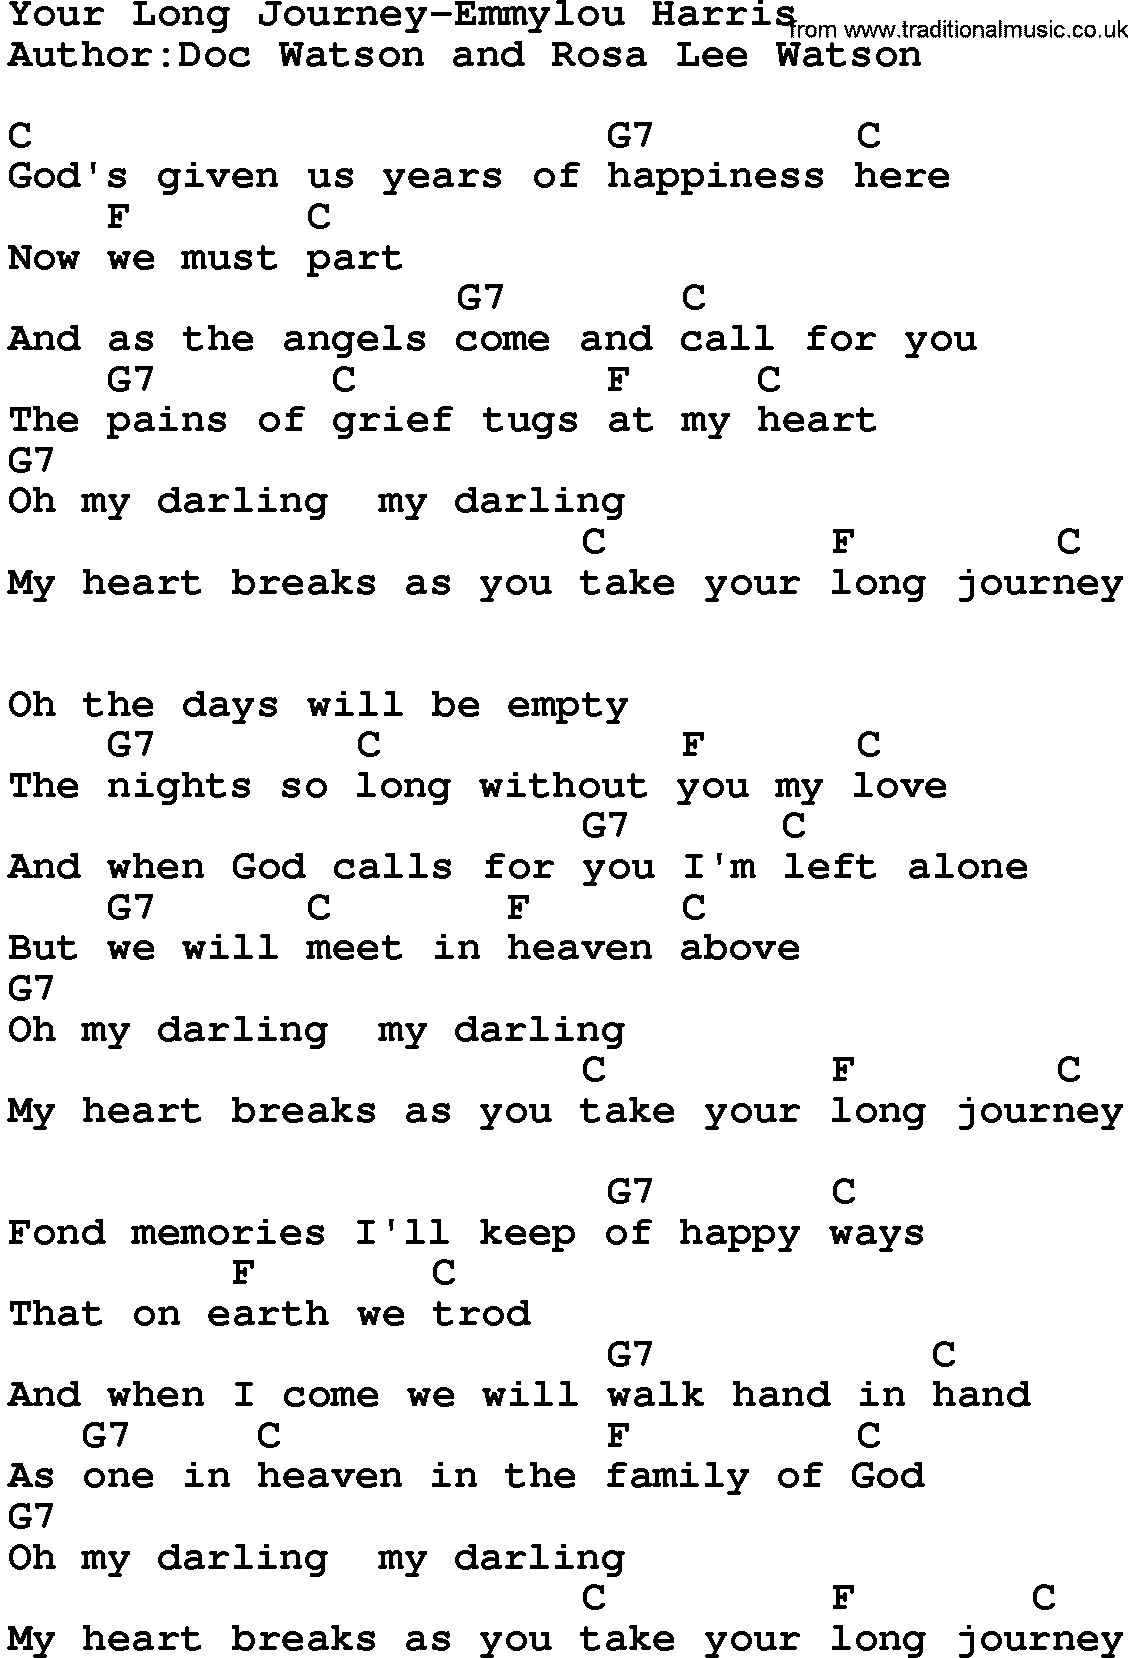 Country music song: Your Long Journey-Emmylou Harris lyrics and chords